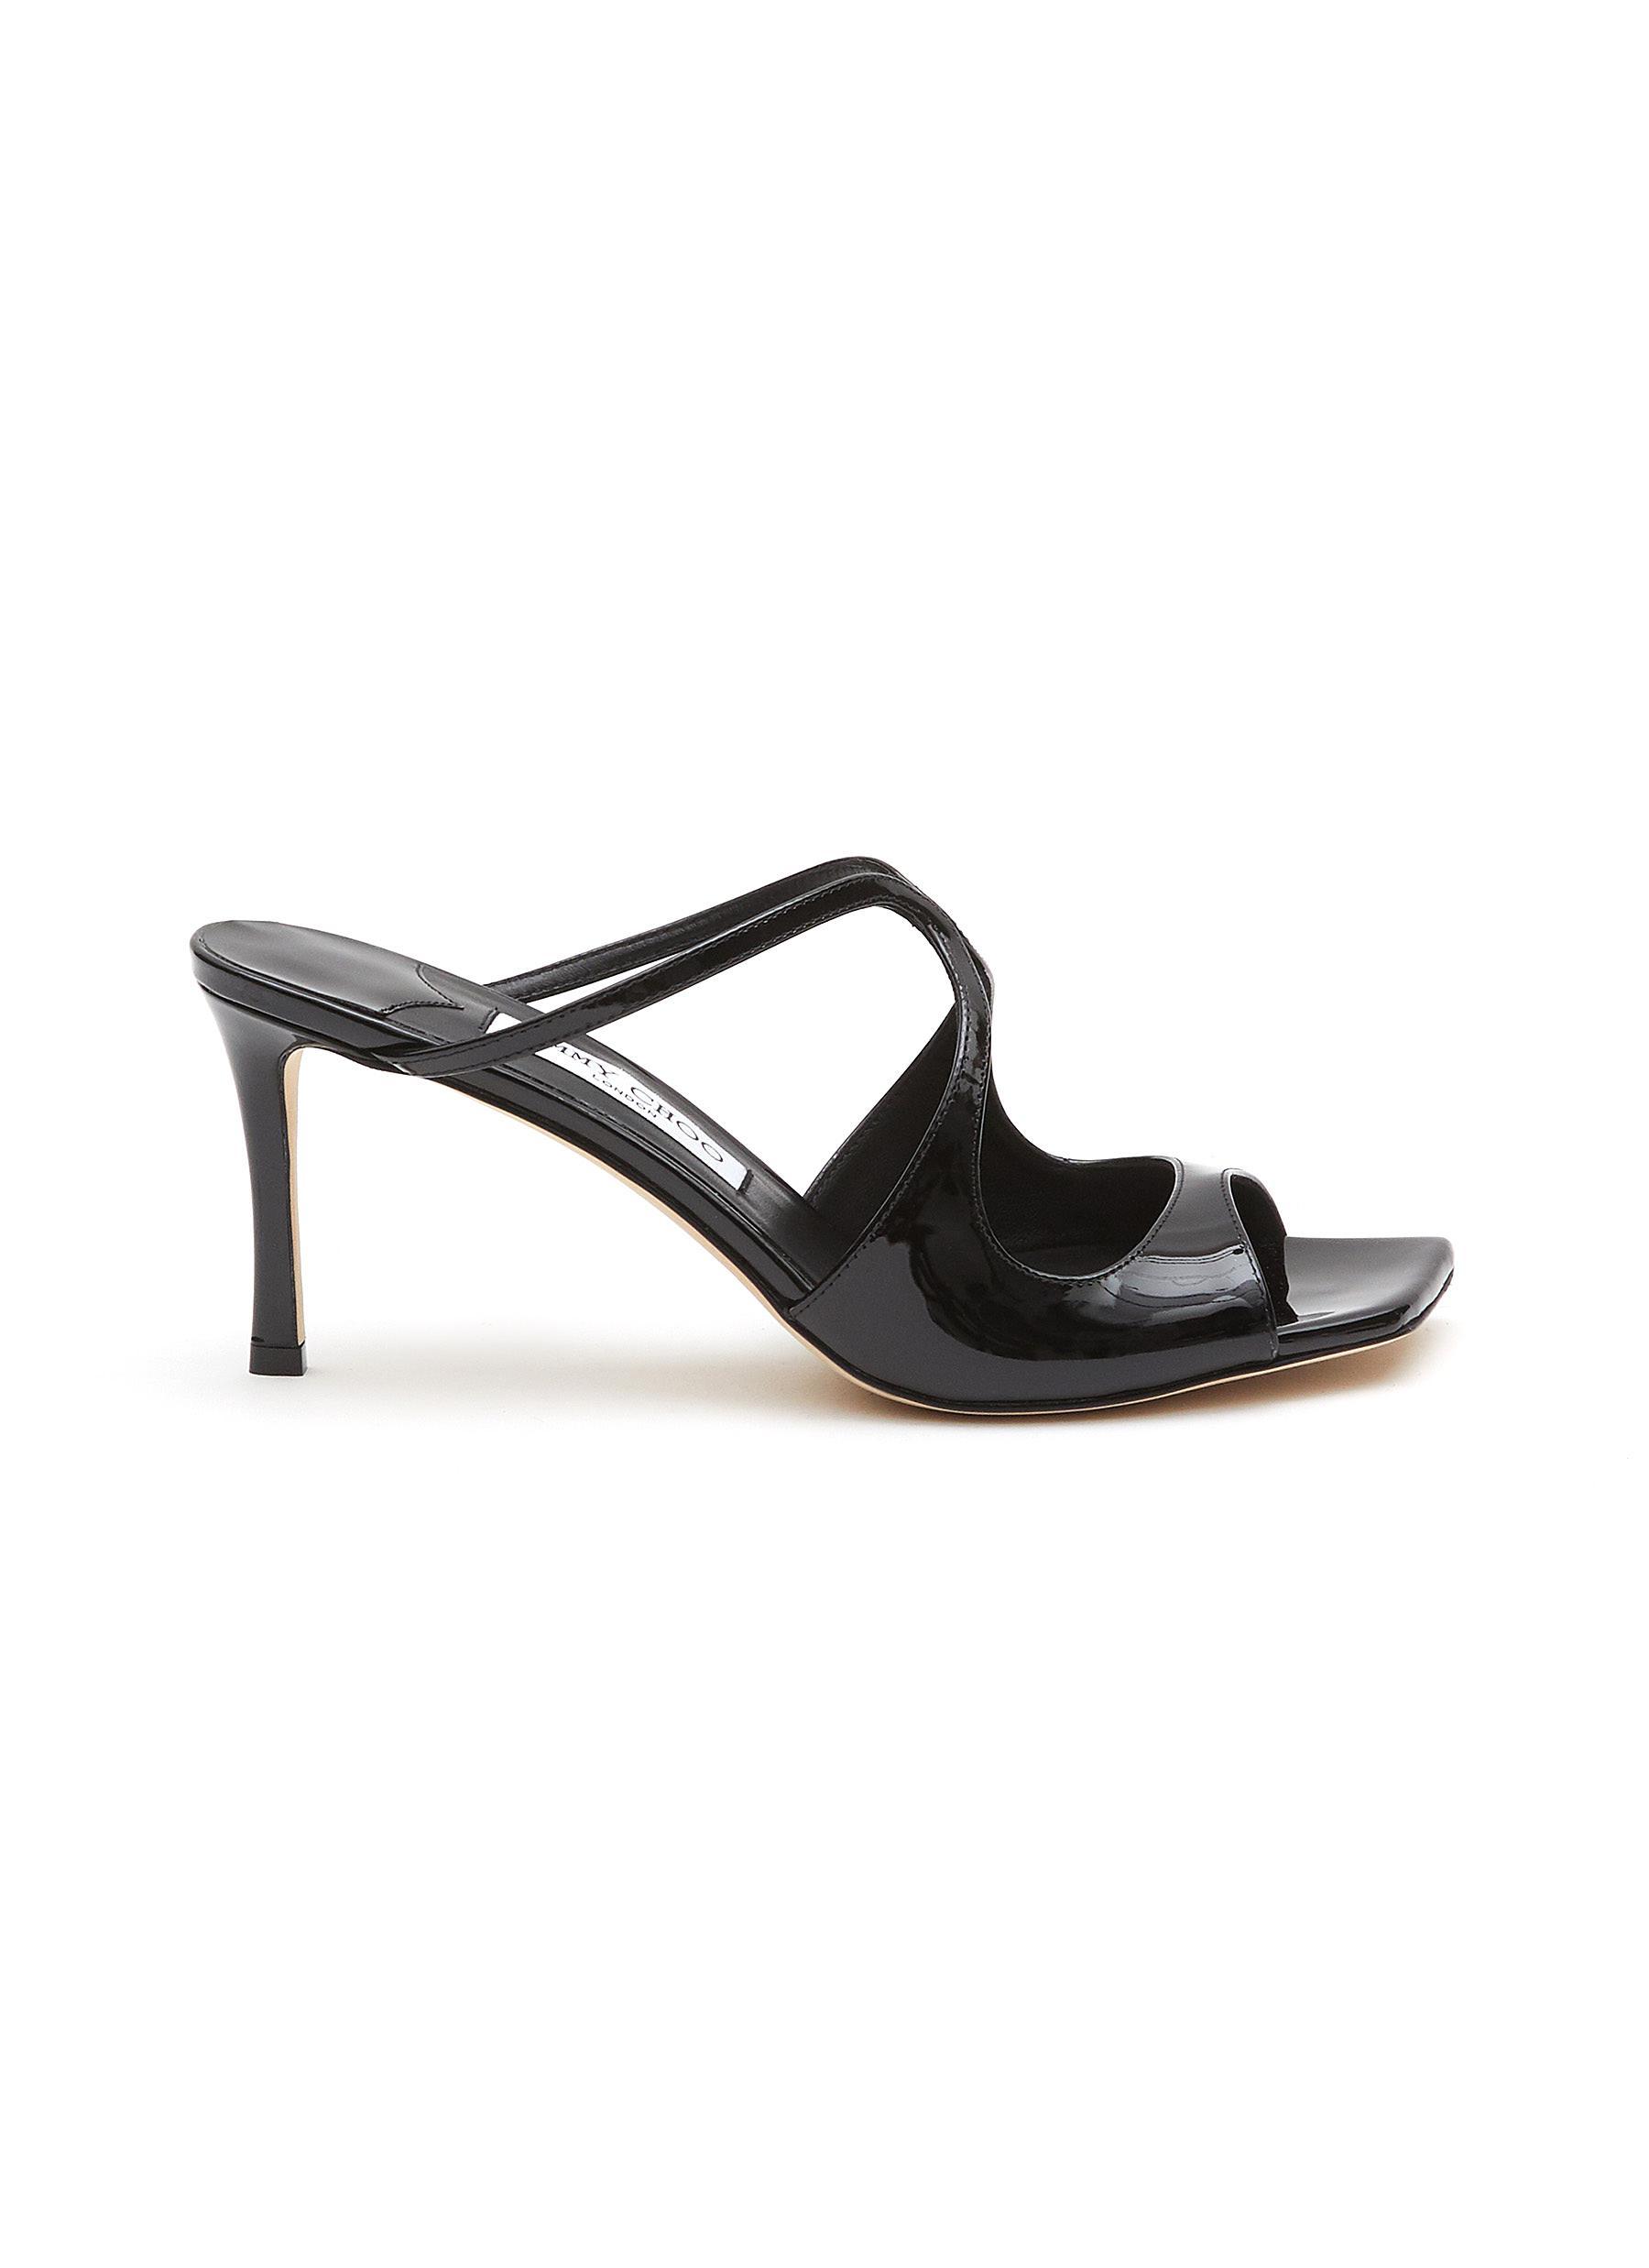 Jimmy Choo 'anise' 75 Patent Leather Sandals in Black | Lyst